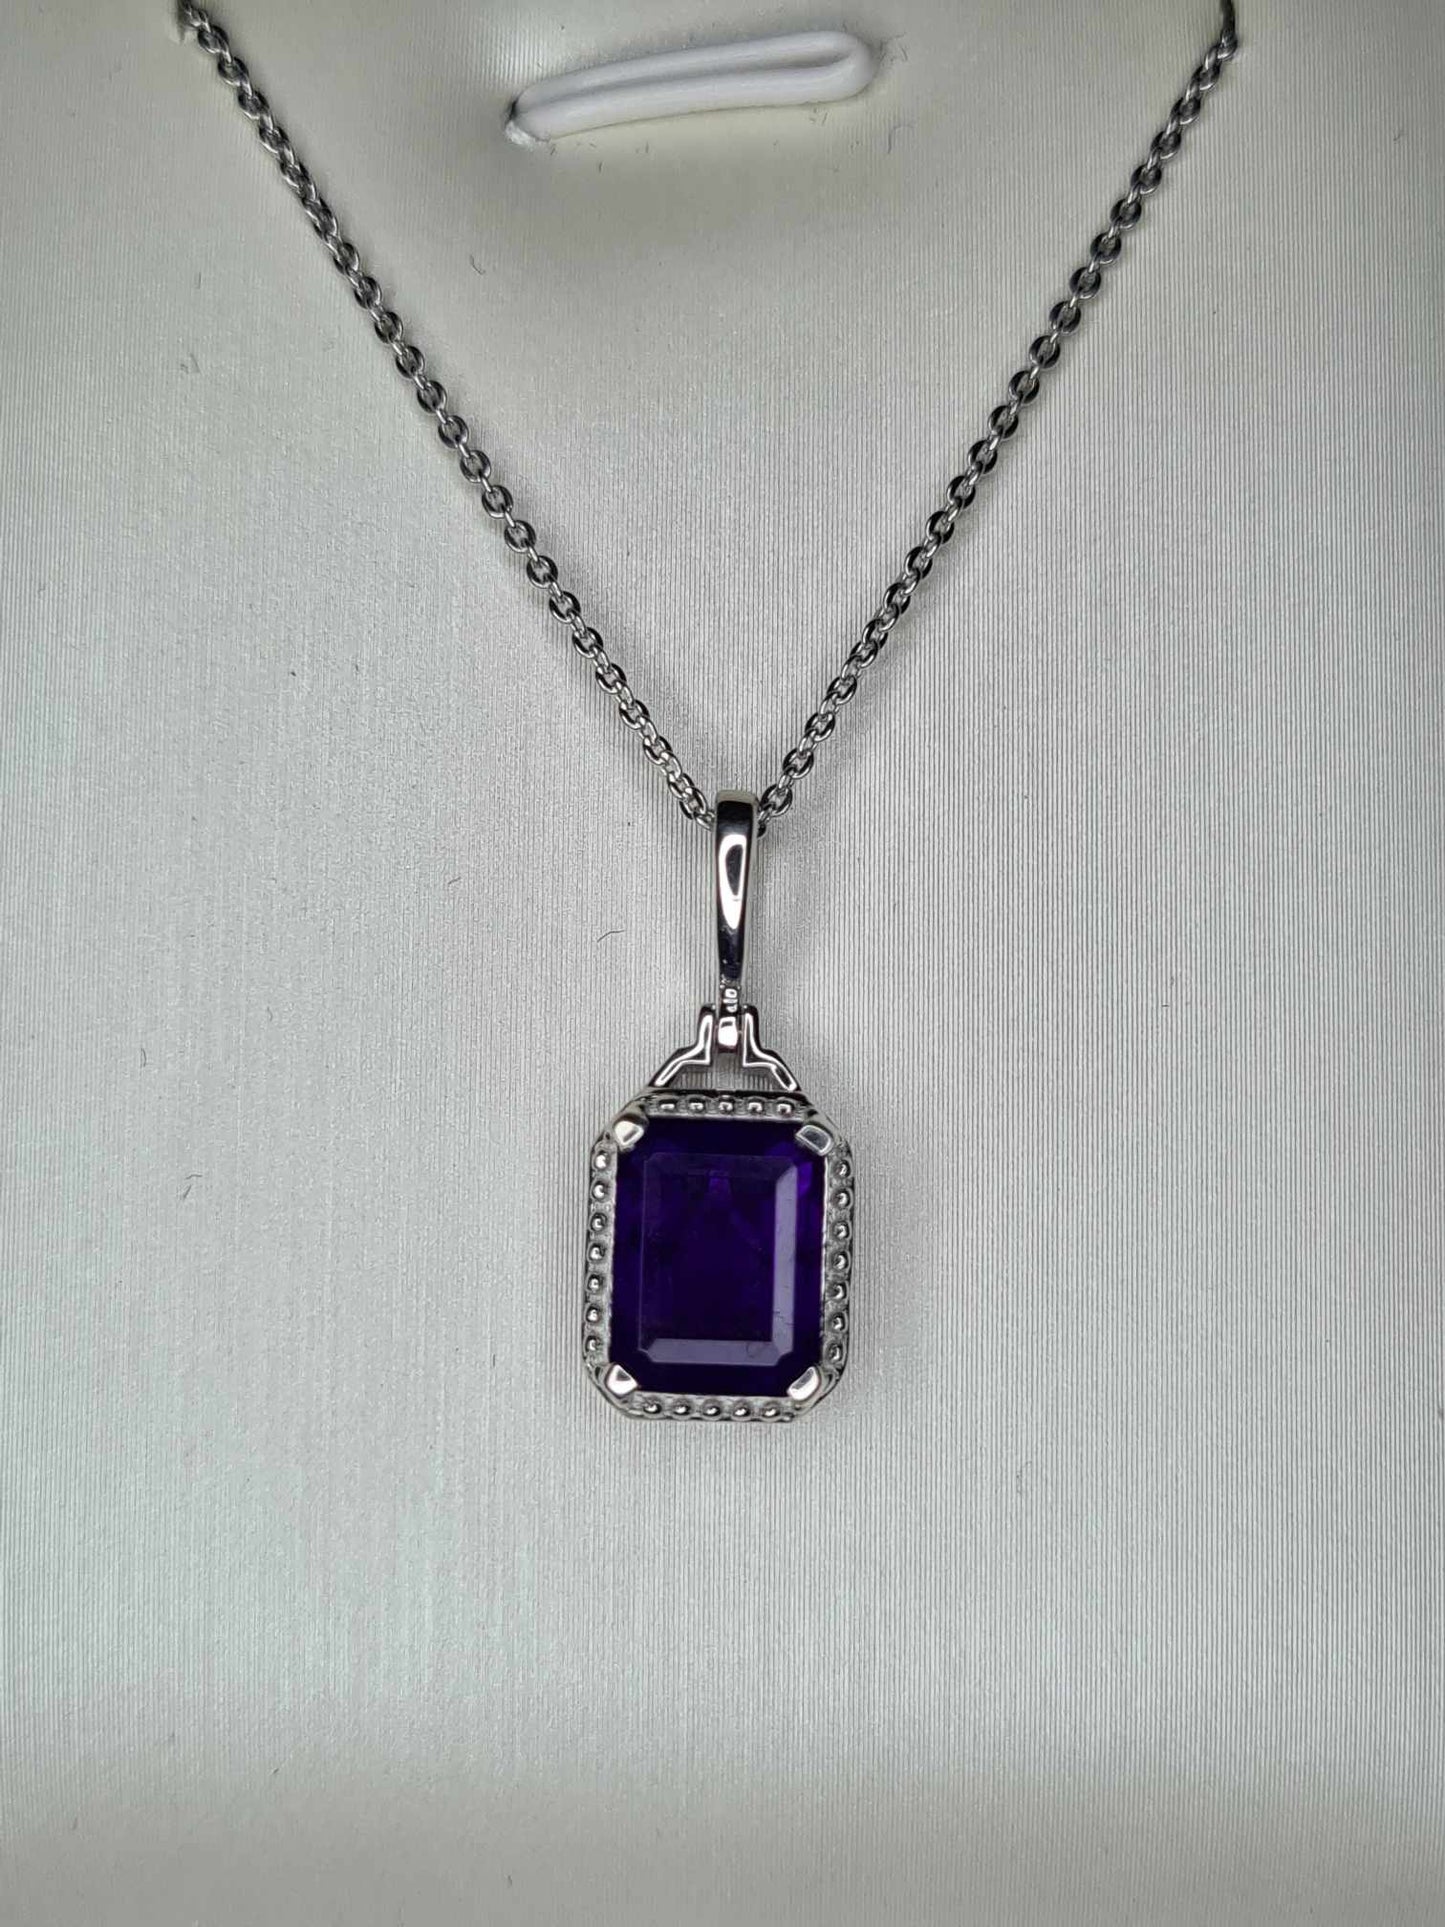 AAA 2.35 Ct Amethyst Solitaire Halo Necklace 925 Sterling Silver